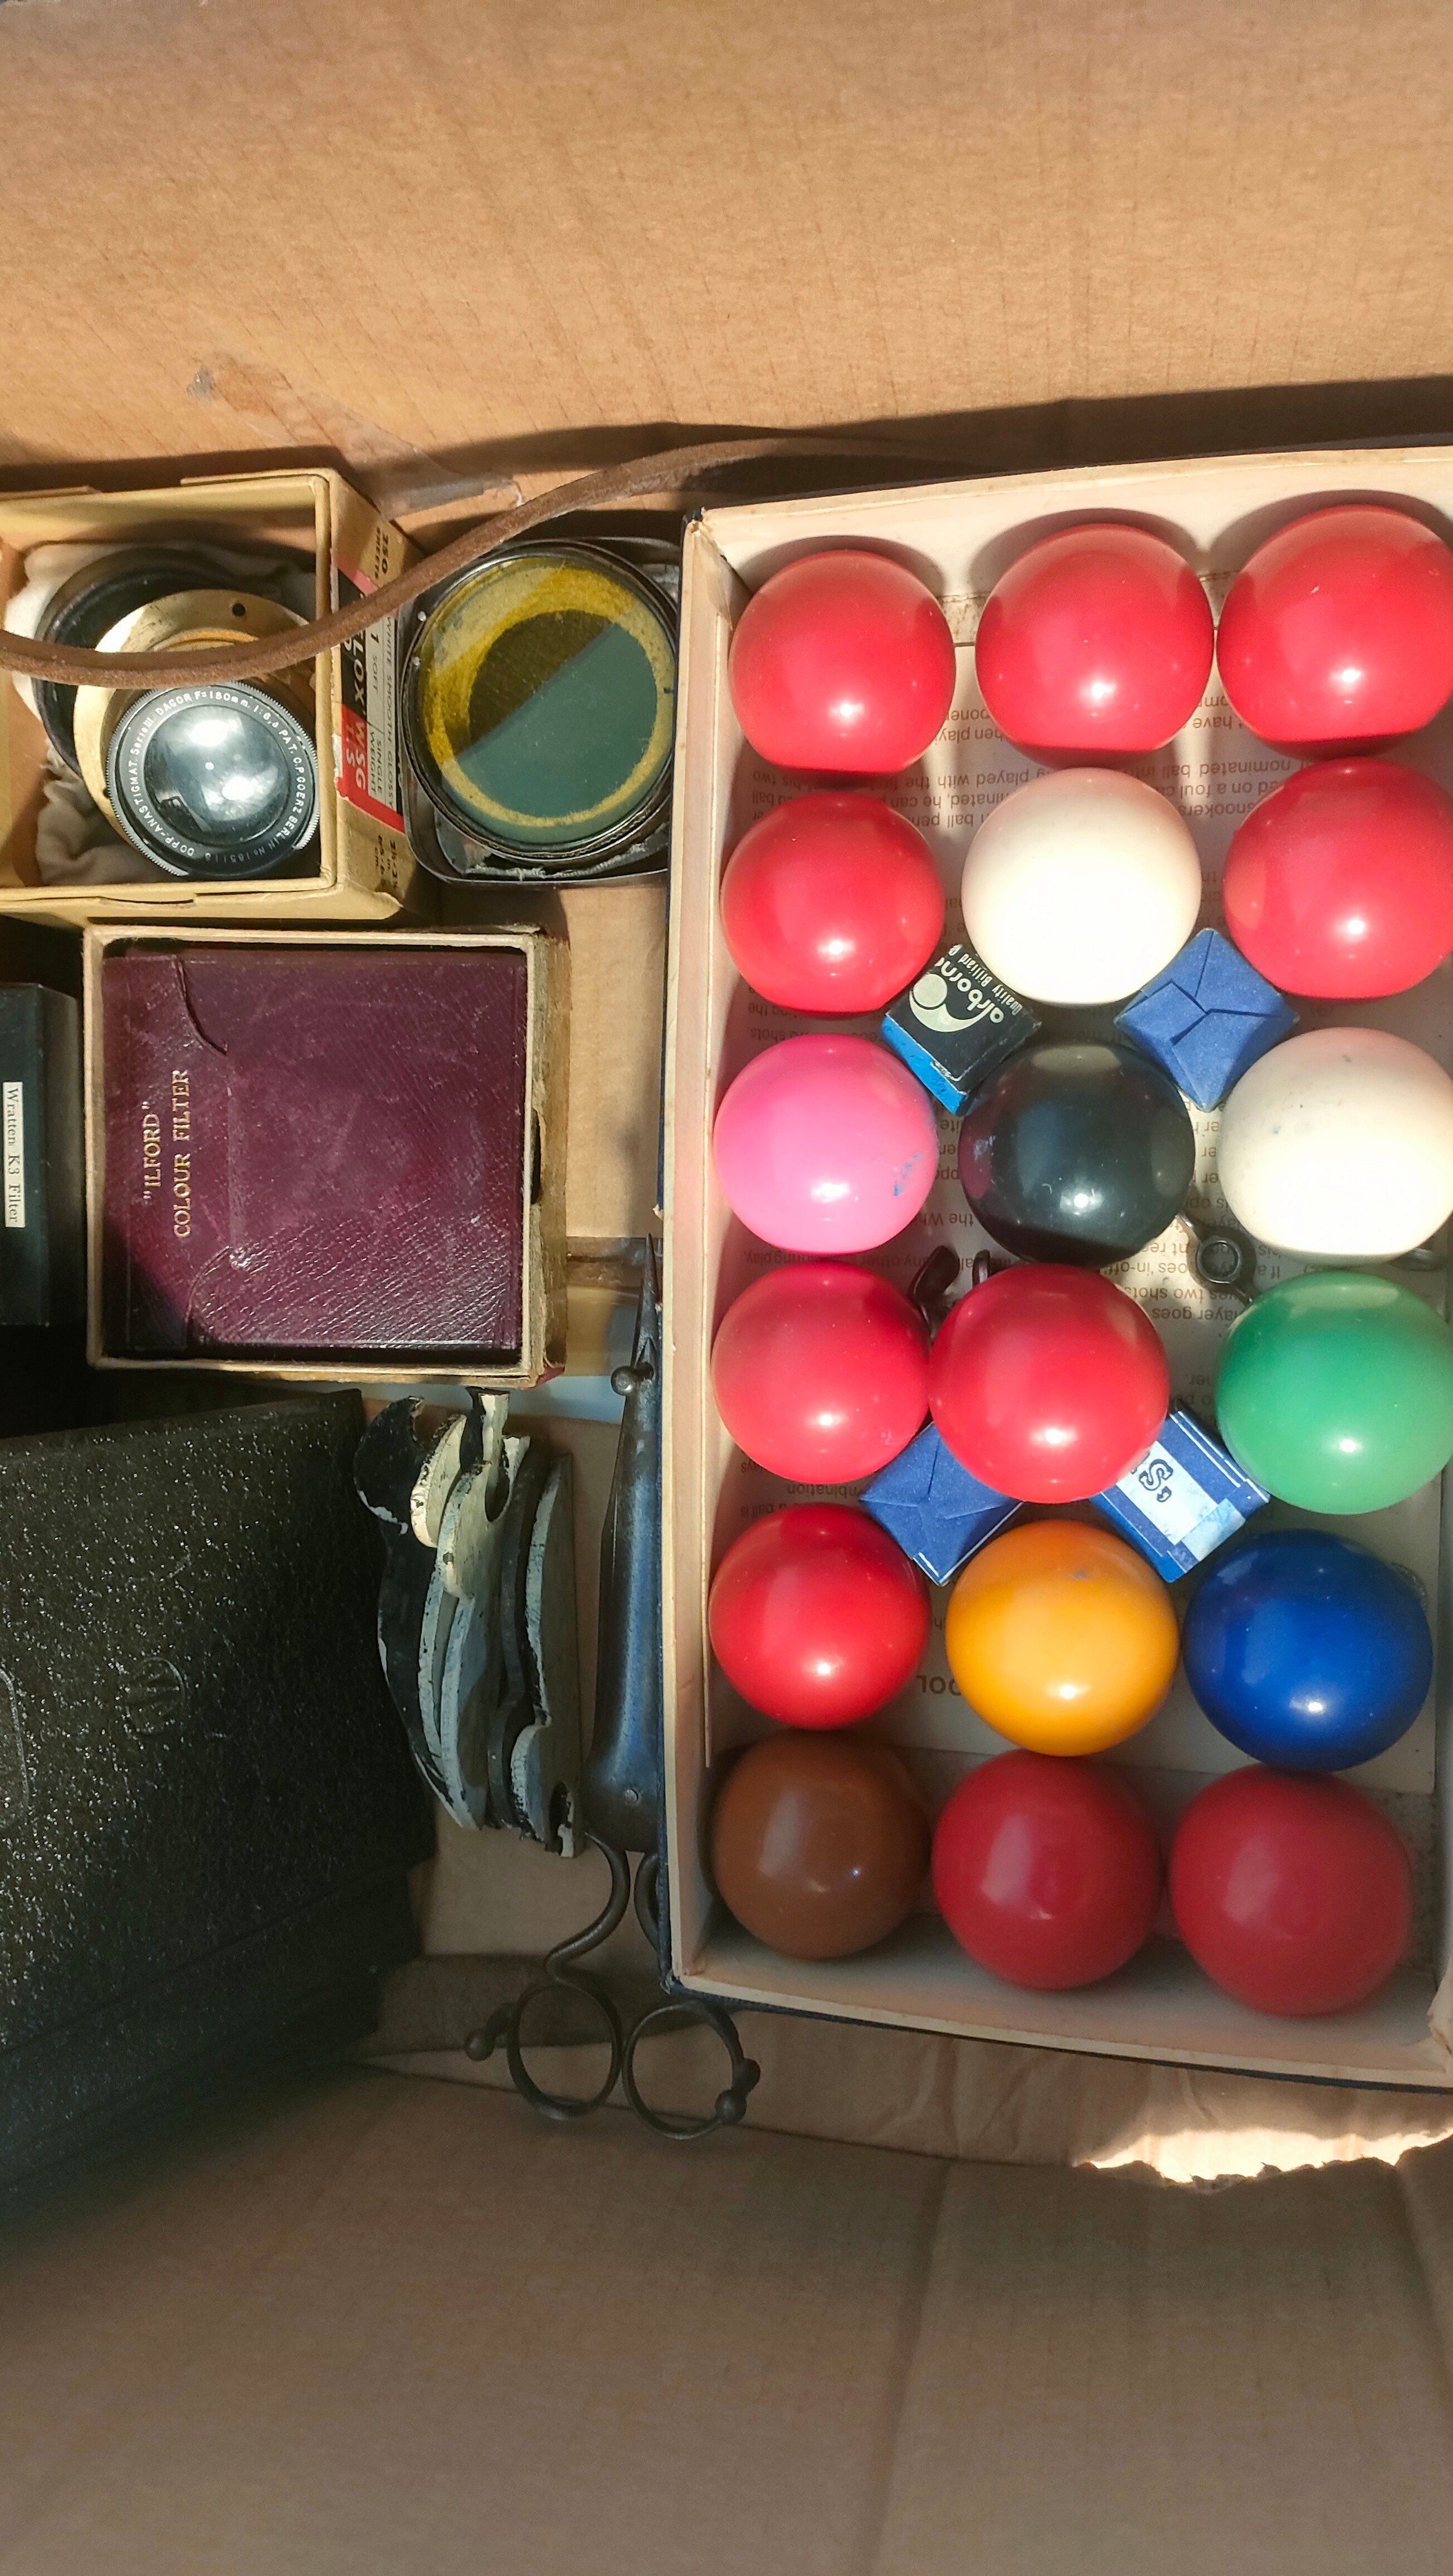 Vintage camera lenses & accessories along with vintage pool balls - Image 2 of 2